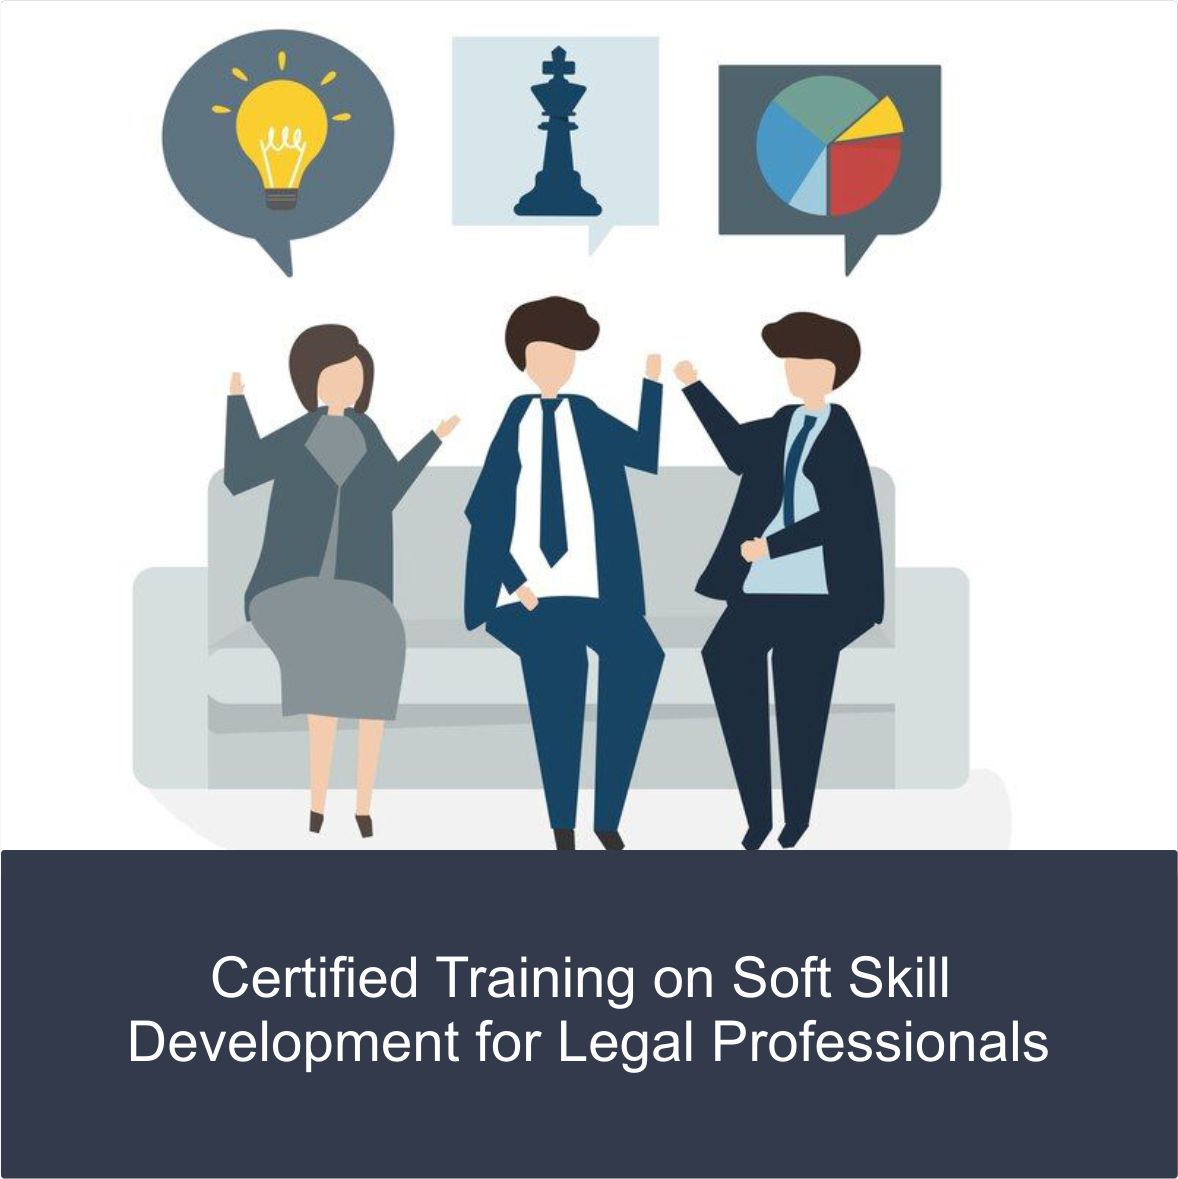 Certified Training on Soft Skill Development for Legal Professionals